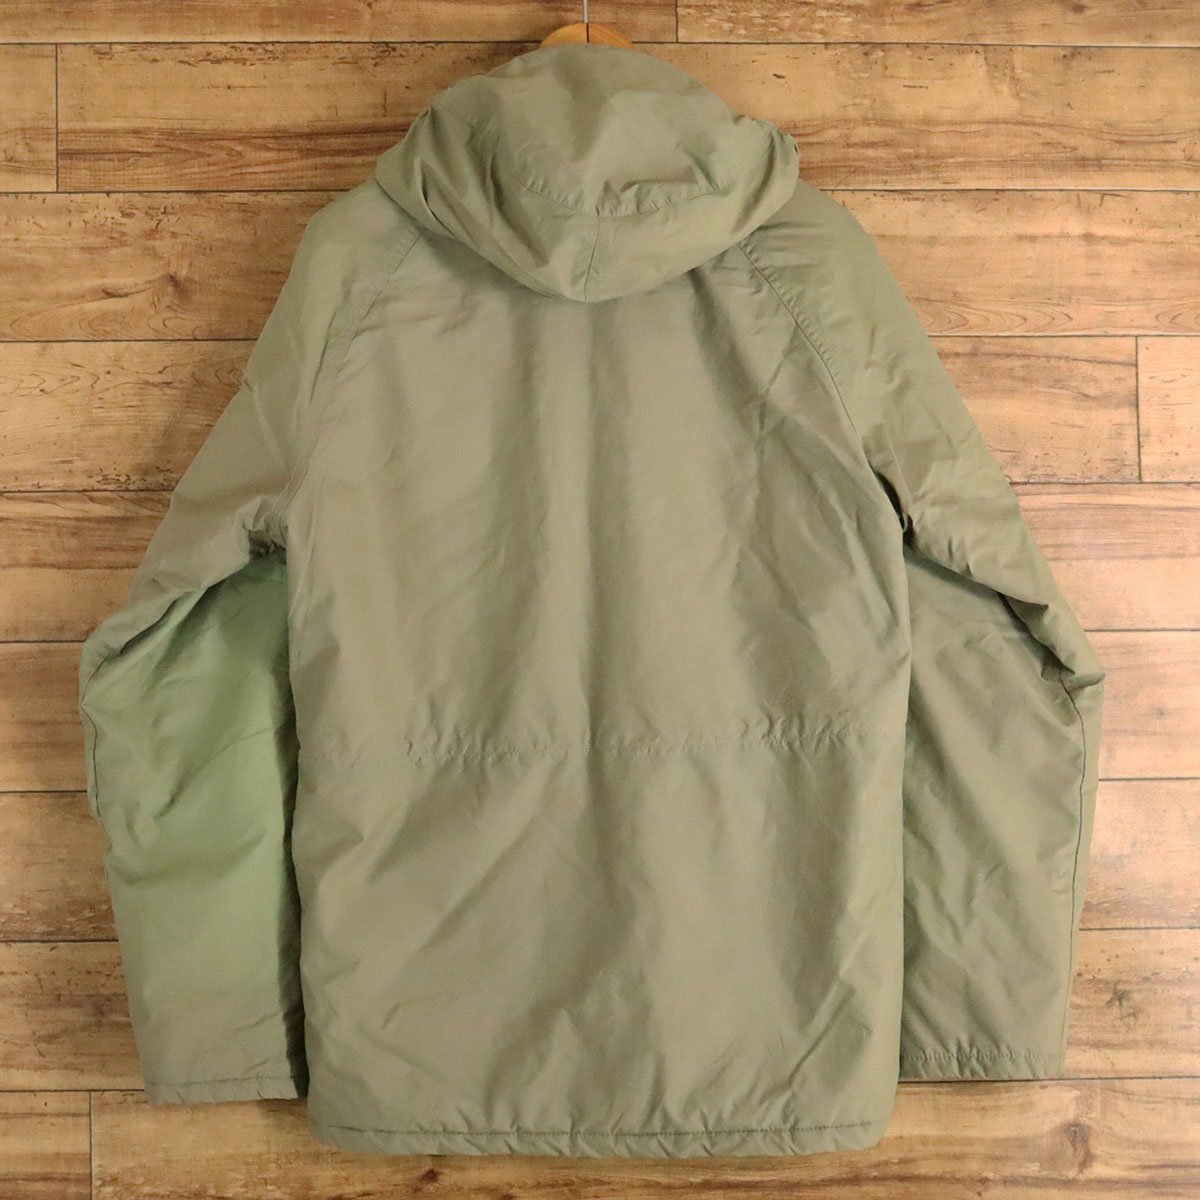 J/R8.25-1 80s ヴィンテージ アメリカ製 WOOLRICH ウールリッチ GORE